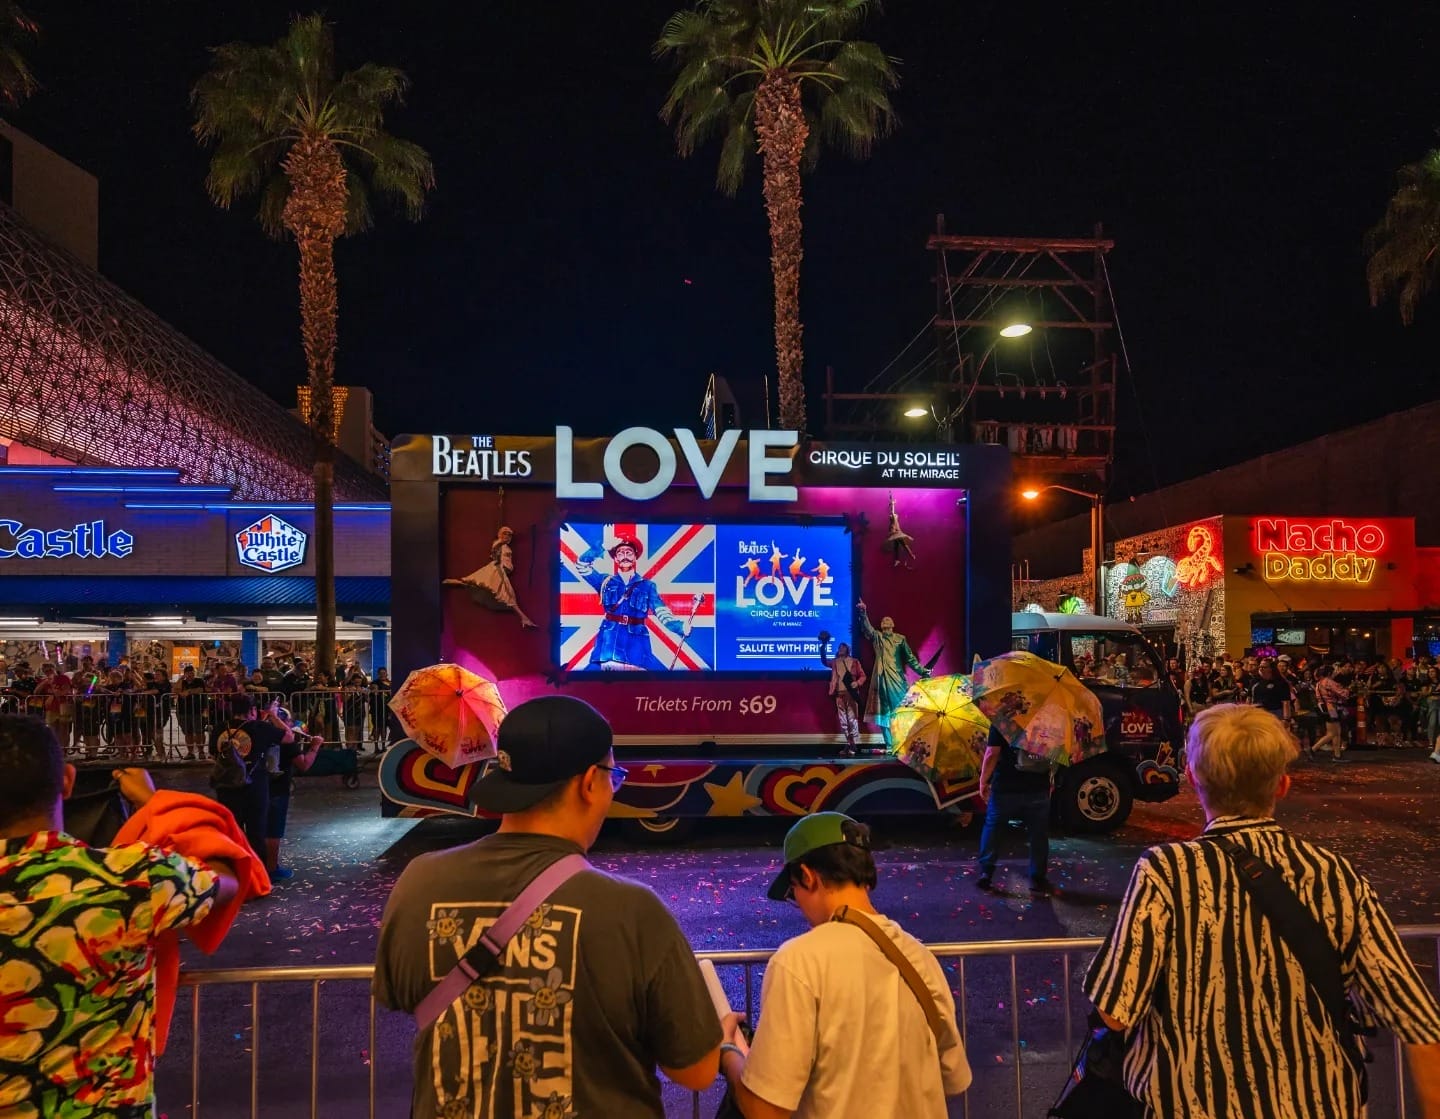 Cirque du Soleil’s The Beatles LOVE: A Magical Fusion of Music and Acrobatics in Las Vegas